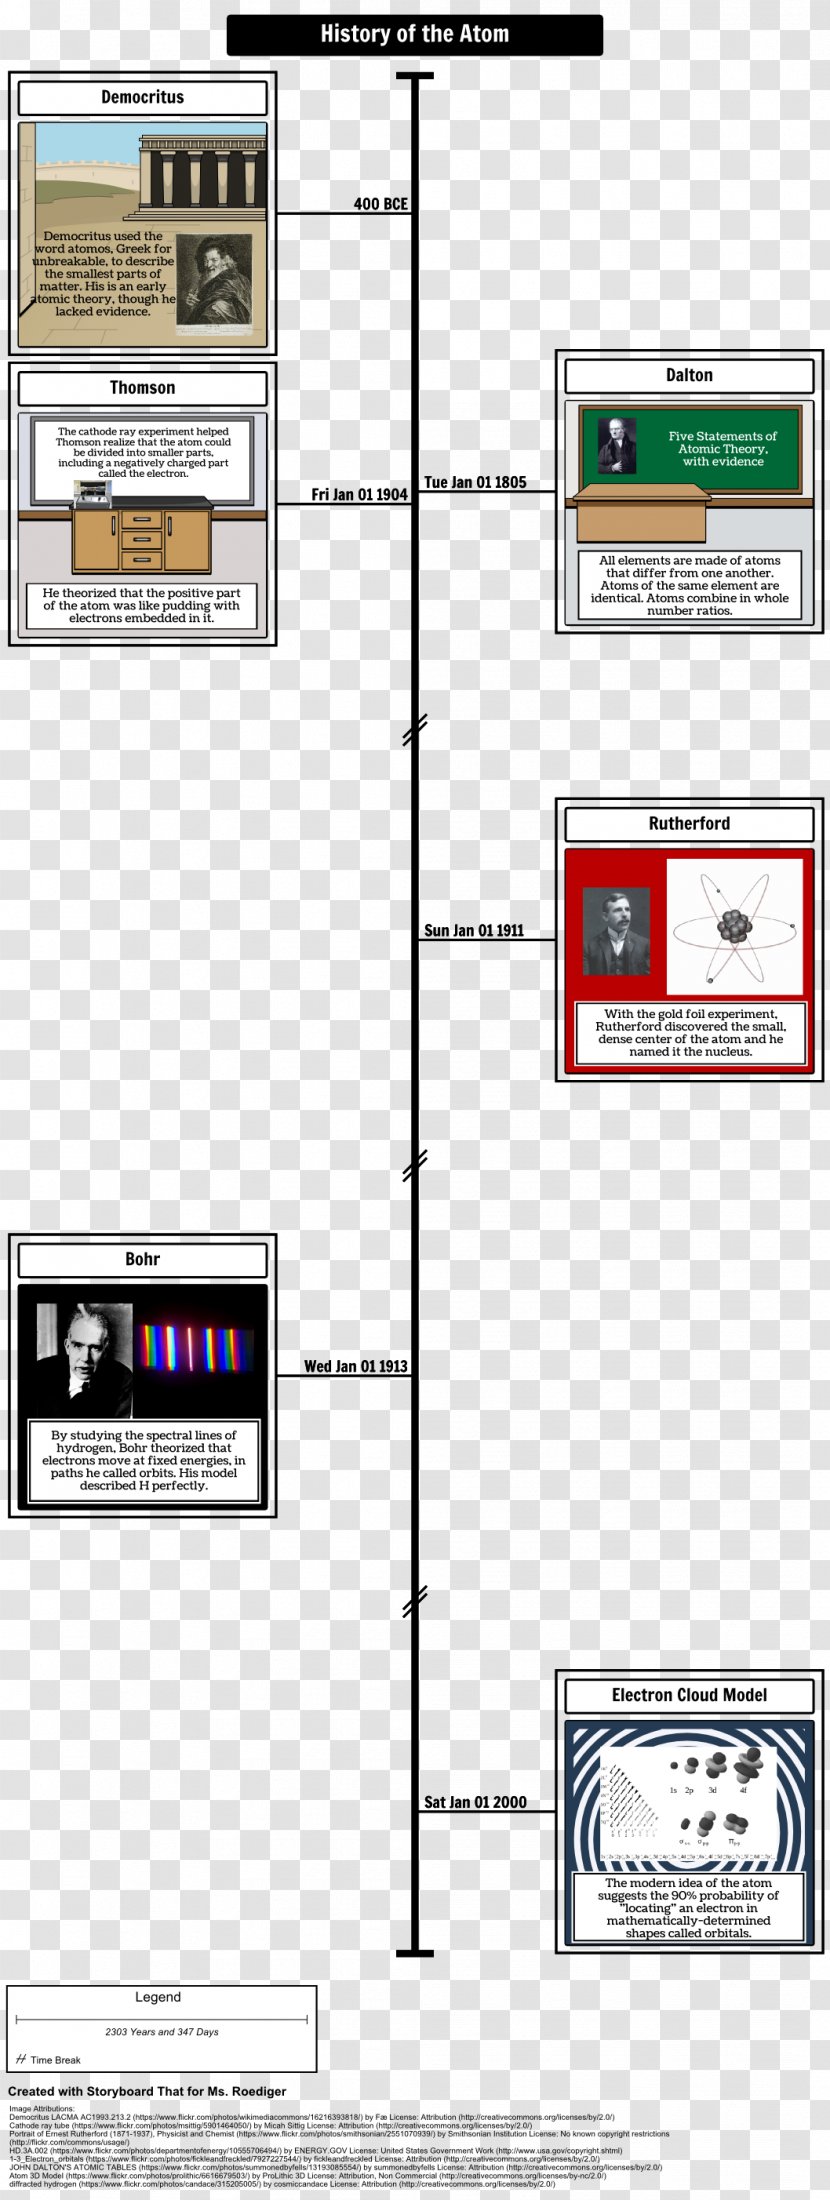 Atomic Theory History Plum Pudding Model Cathode Ray - Learning - Timeline Transparent PNG